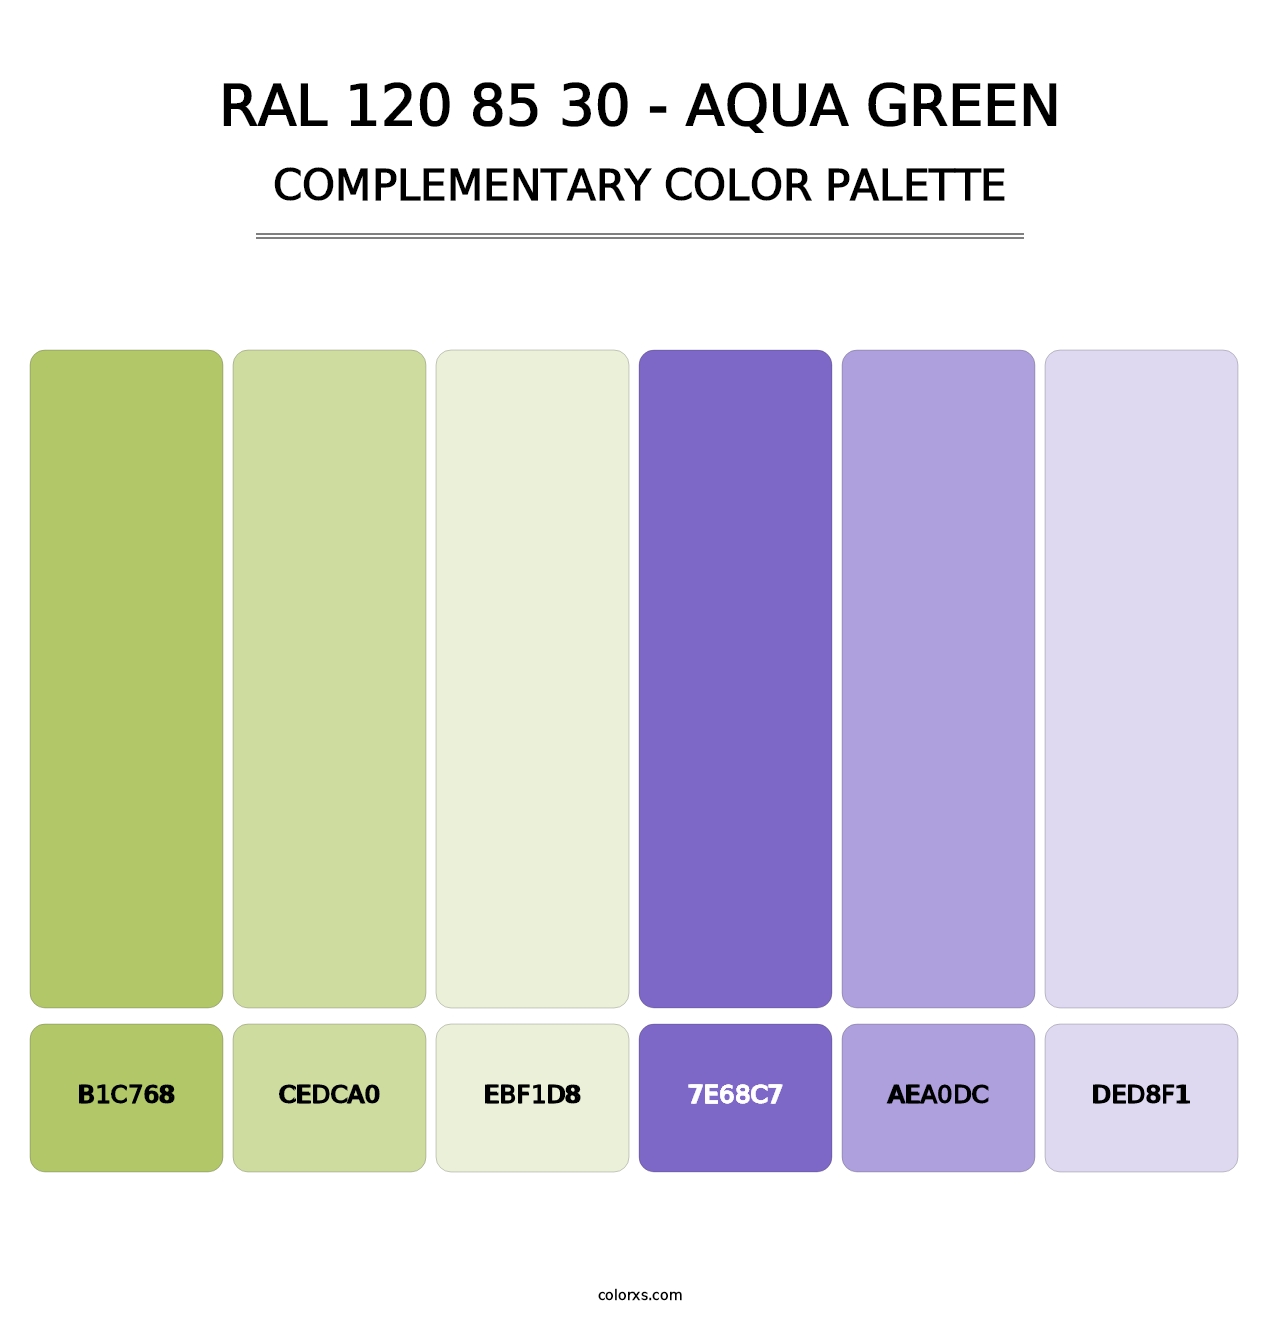 RAL 120 85 30 - Aqua Green - Complementary Color Palette